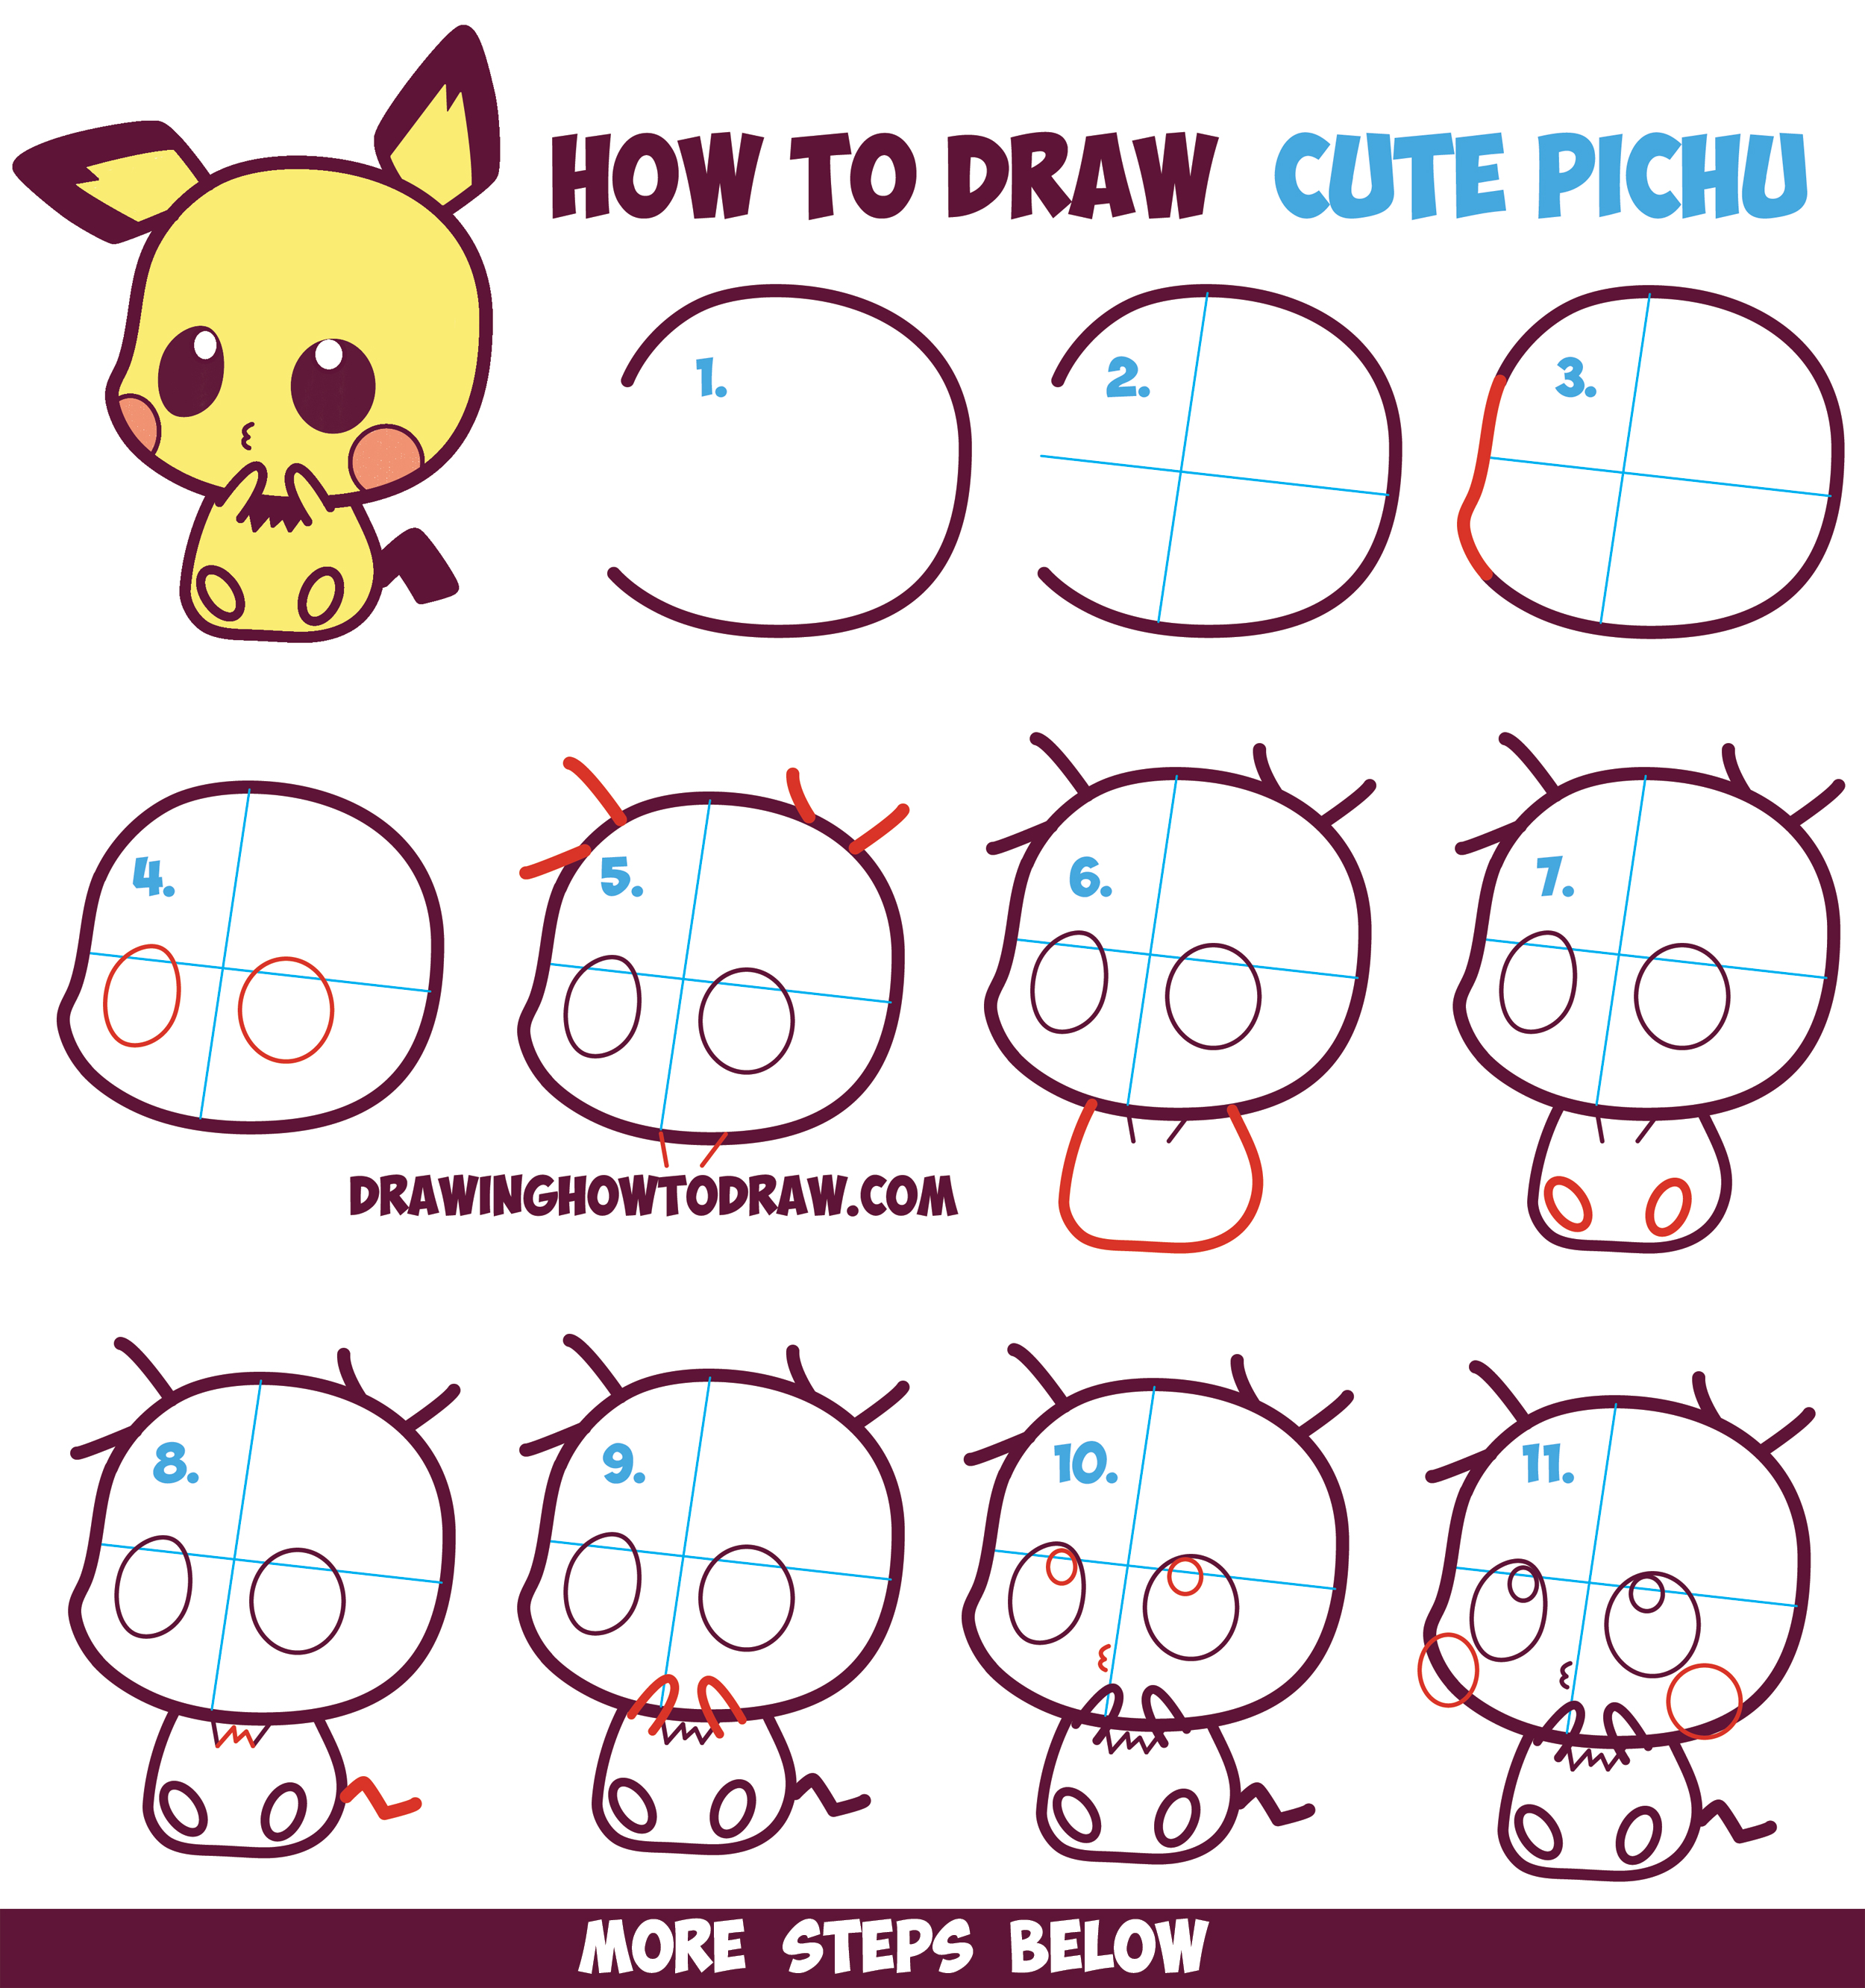 How to Draw Cute / Kawaii / Chibi Pichu from Pokemon in Easy Step ...